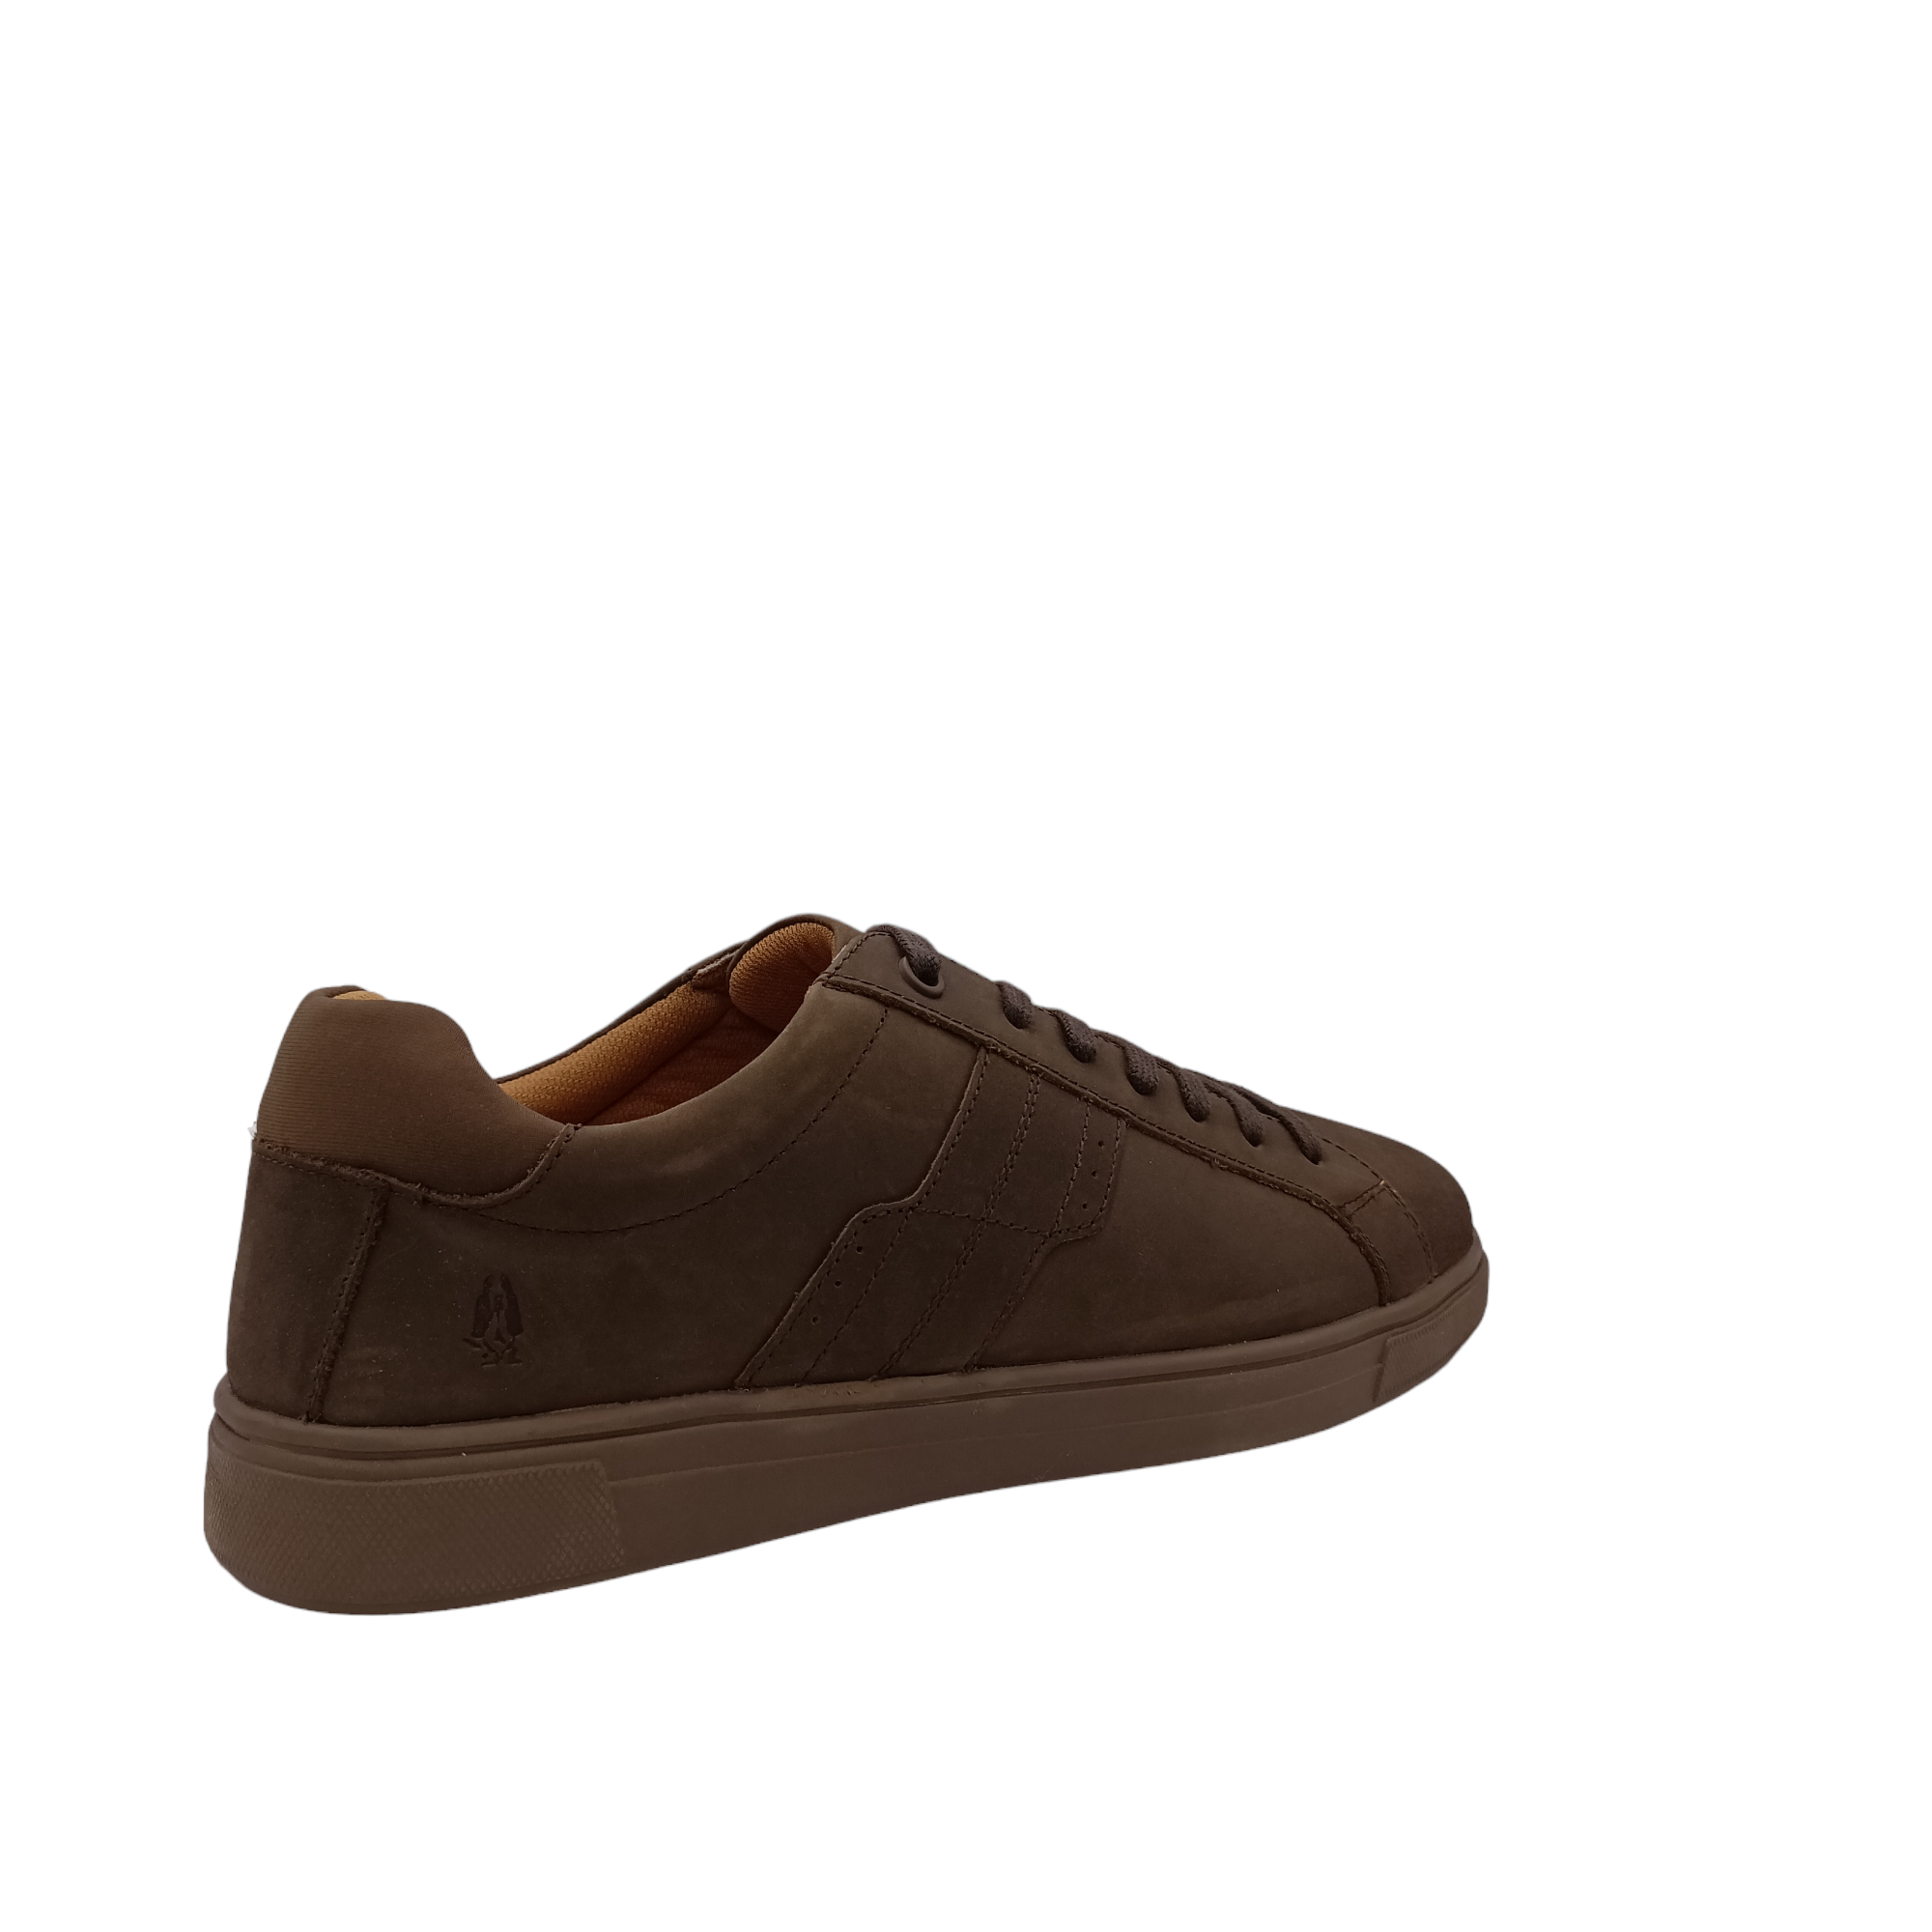 Gravity Leather from Hush Puppies.  back angled view of brown oiled leather lace up shoe with dark brown flat laces. Lightening pattern from laces down to dark brown sole. Shop Online and In-store with shoe&me Mount Maunganui